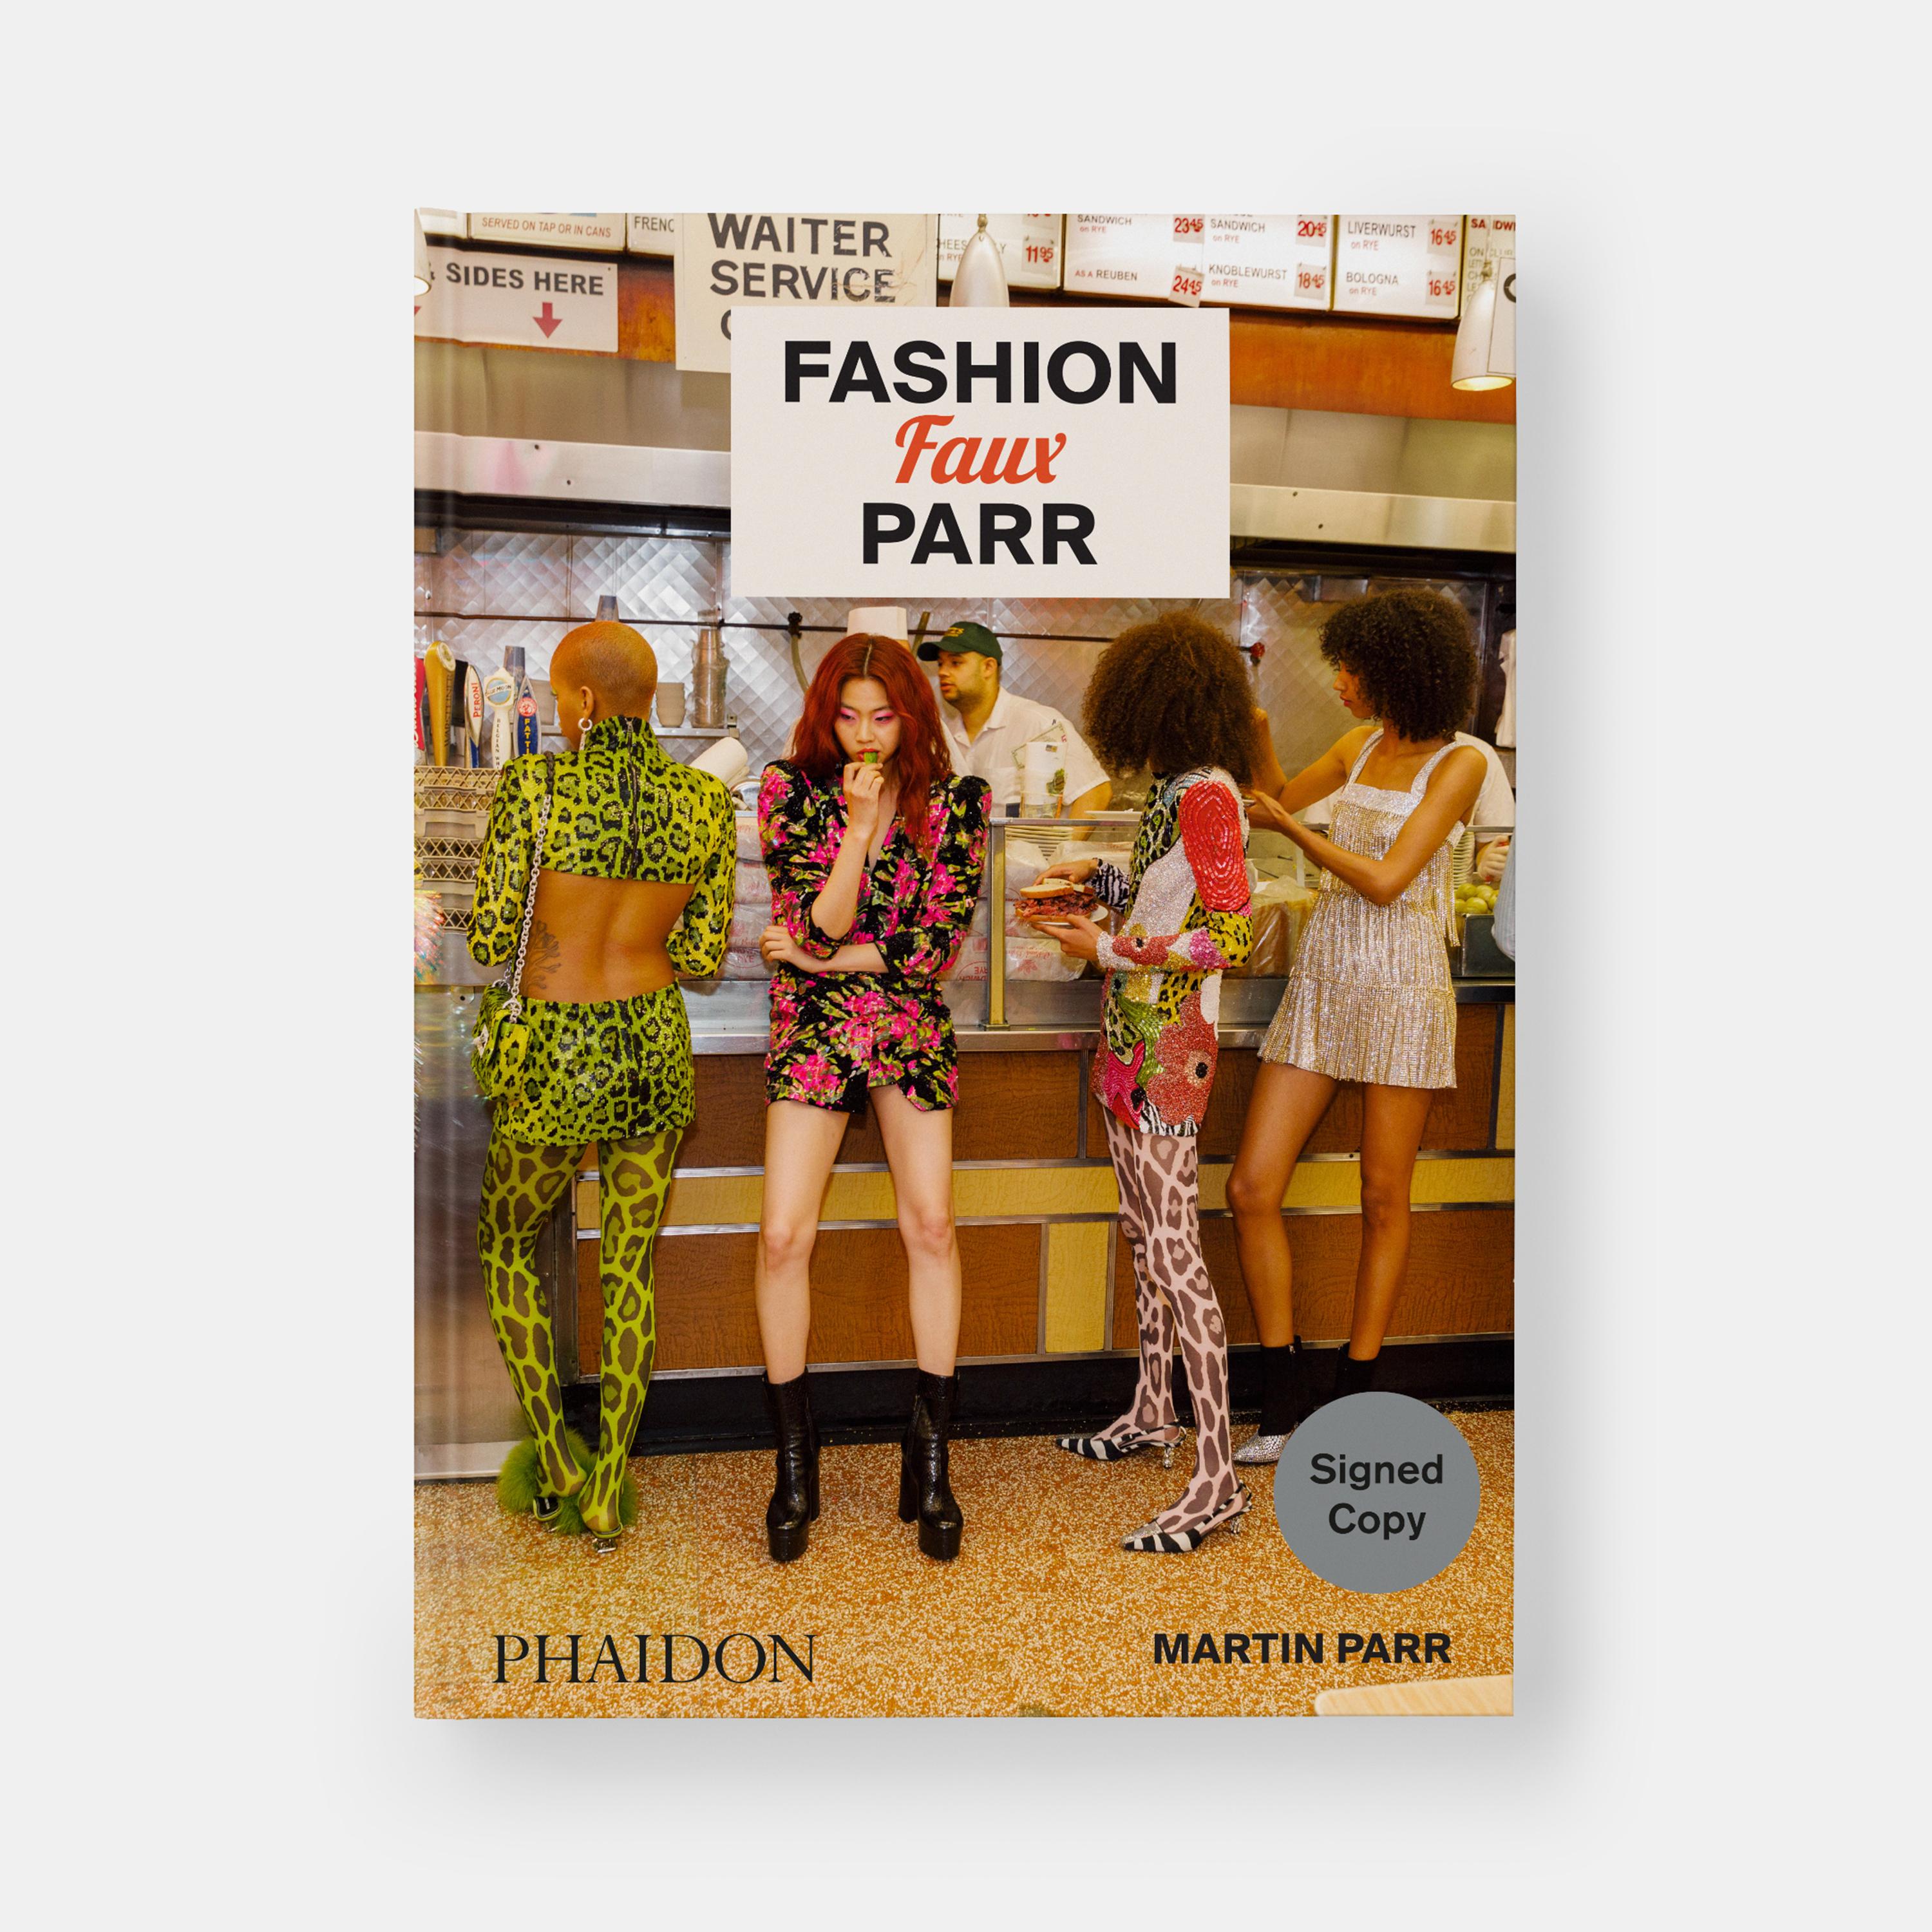 The first book dedicated to the fashion photography of renowned British photographer Martin Parr

Fashion Faux Parr showcases Martin Parr’s collection of fashion photography for the first time in one book. More than 250 color images, many previously